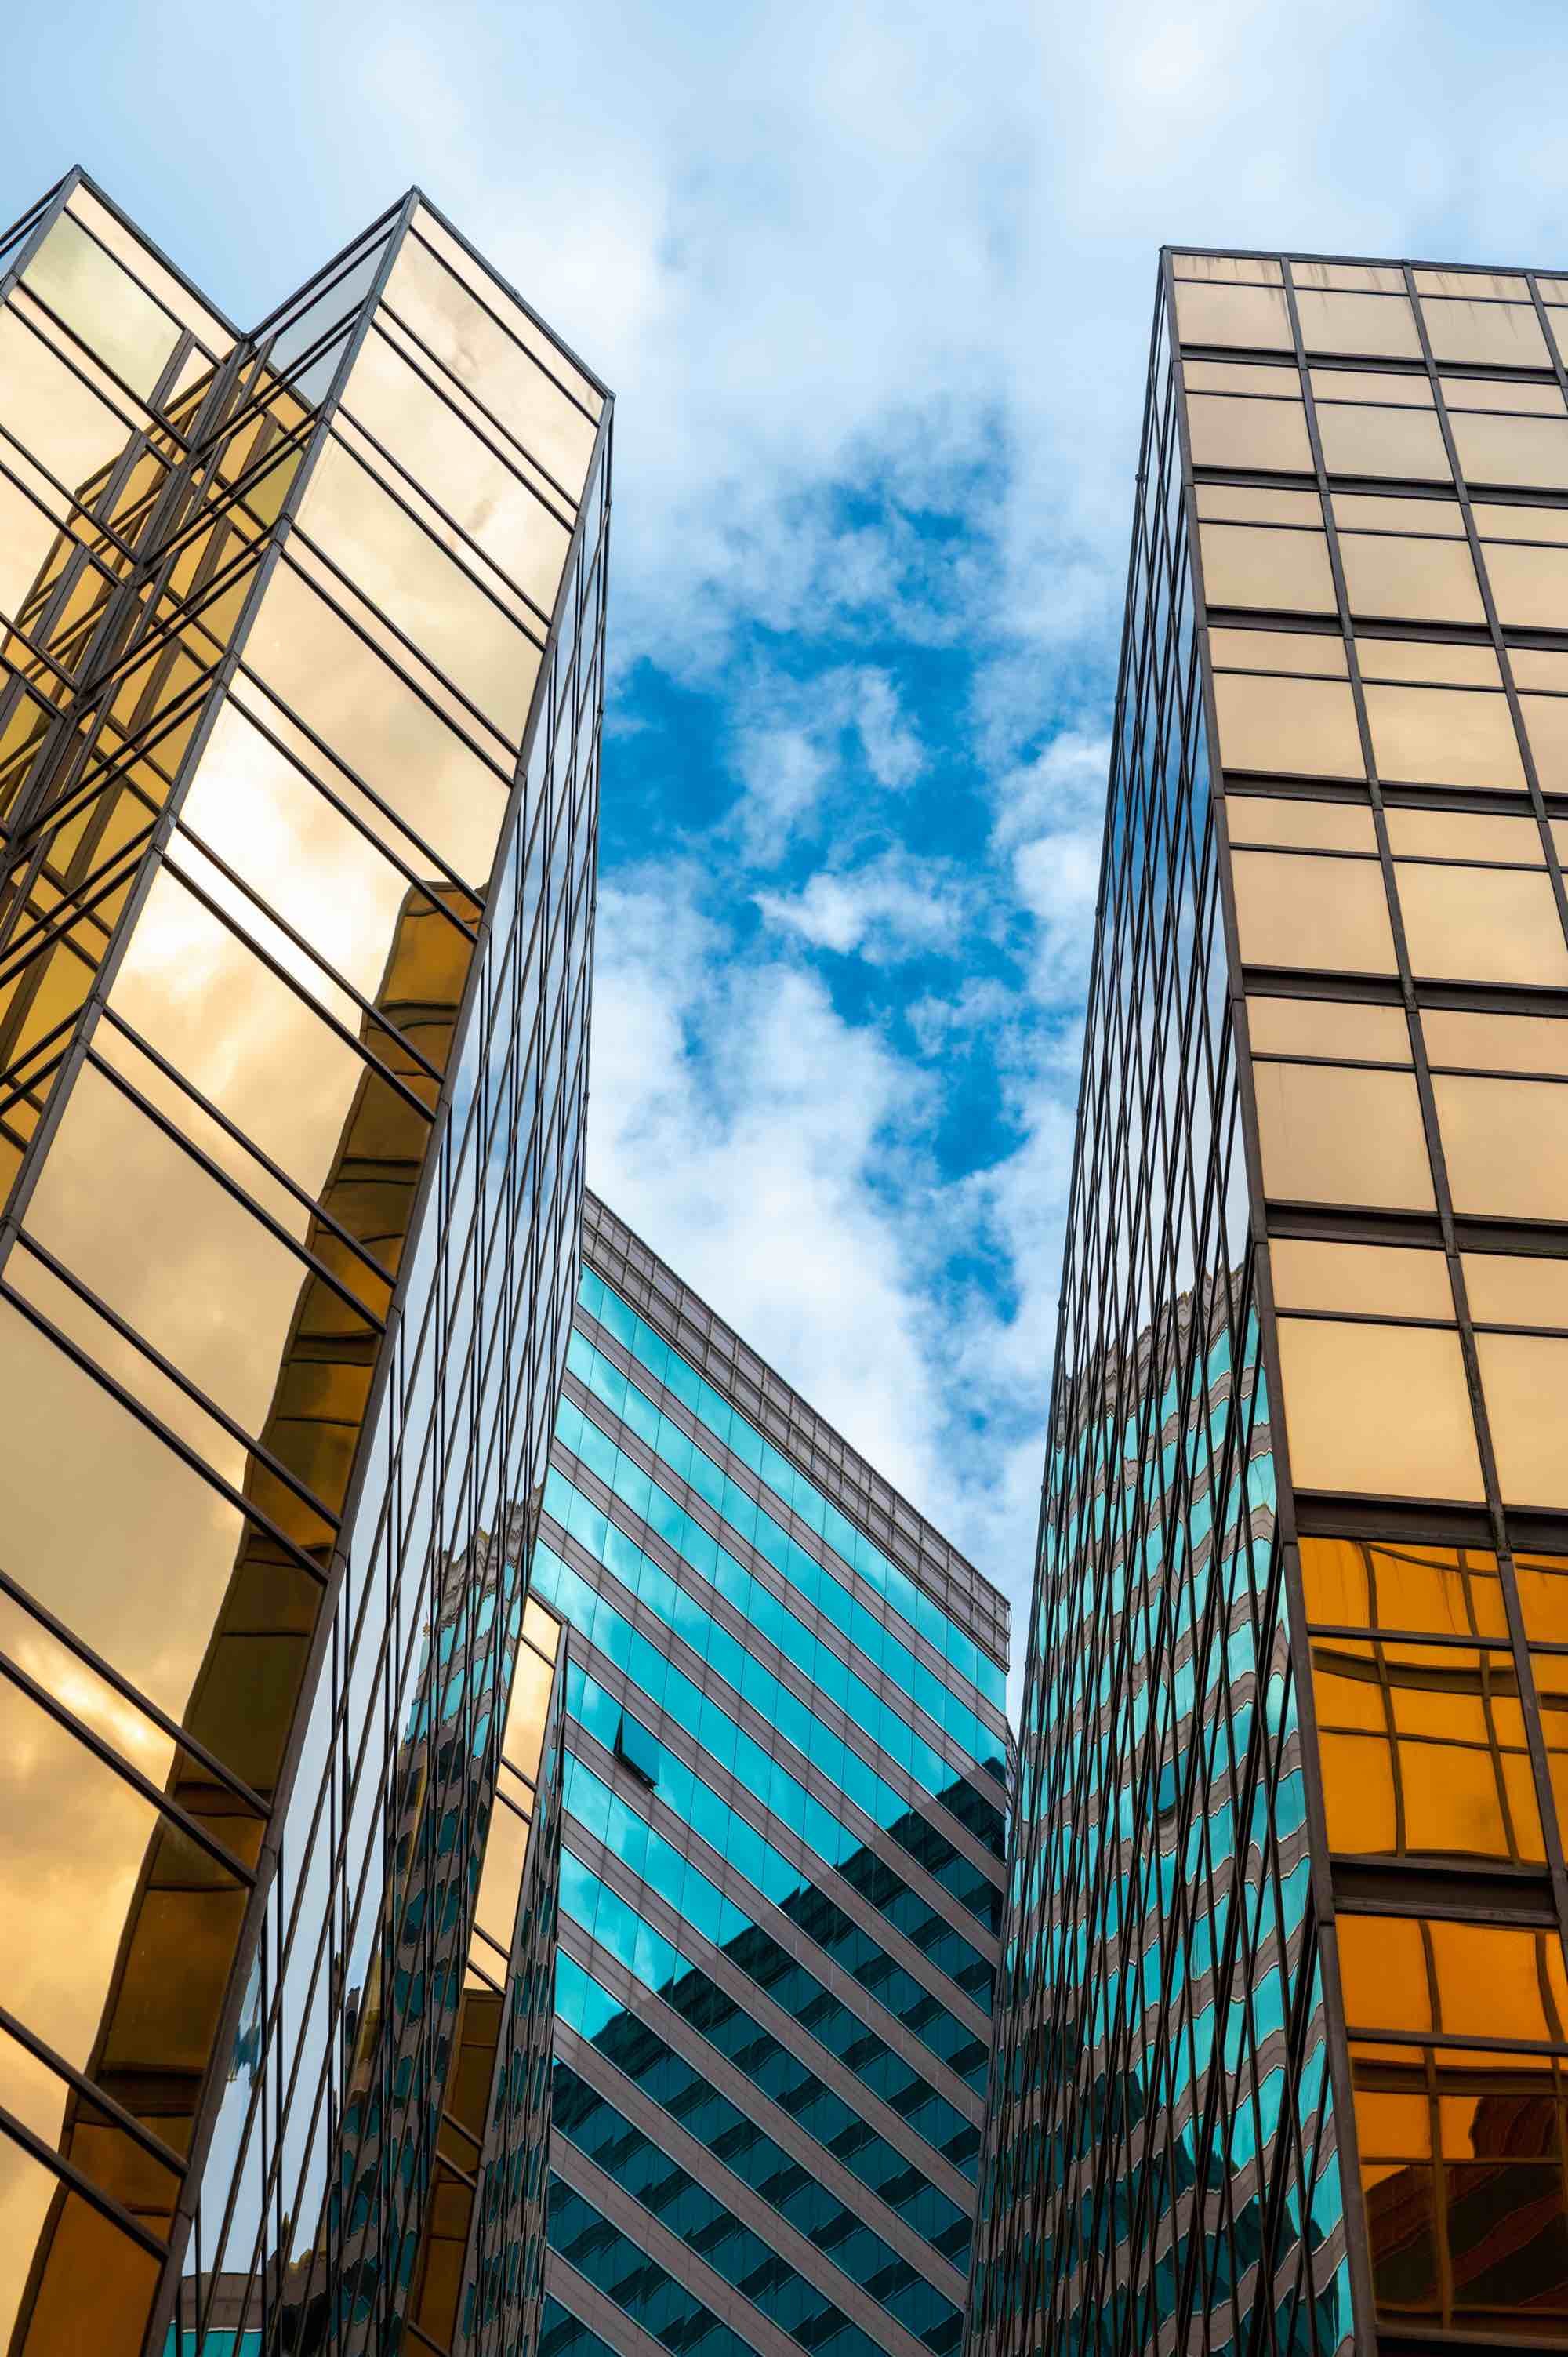 golden-tall-buildings-and-glass-reflections-in-hon-2022-12-16-02-55-21-utc